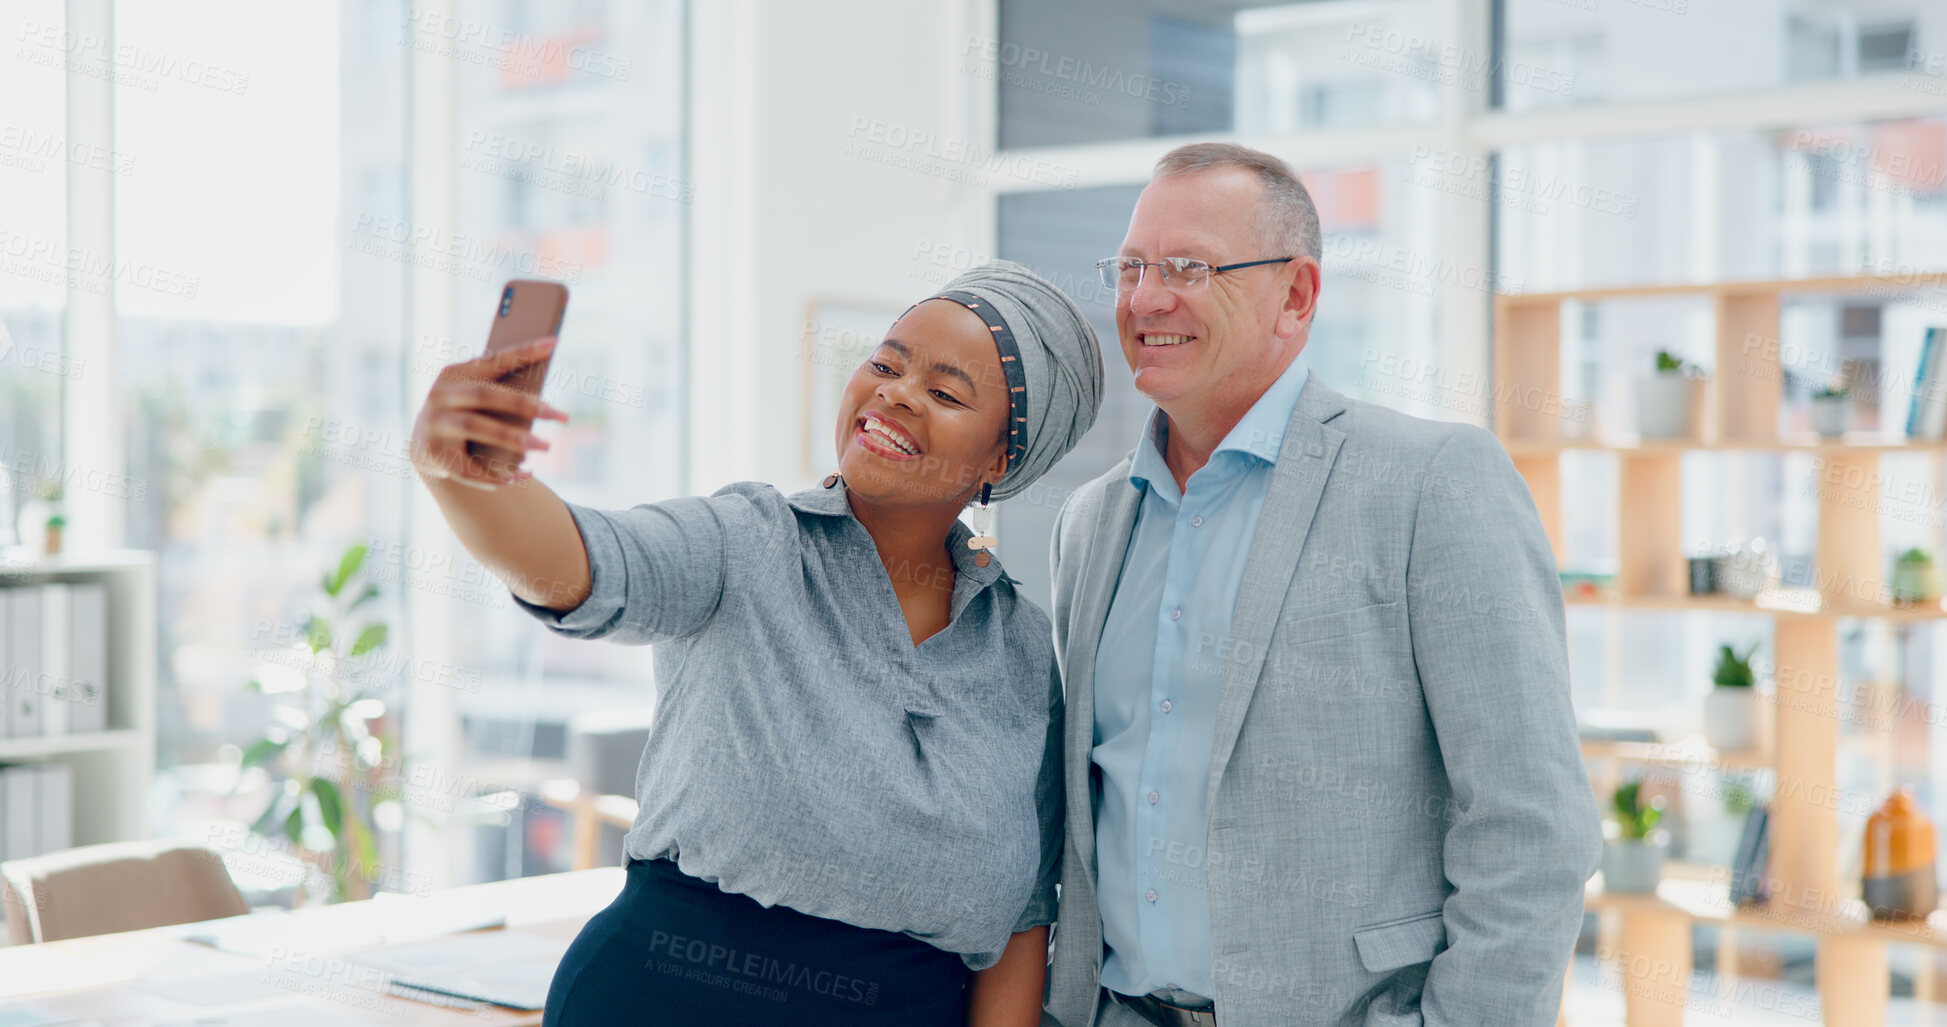 Buy stock photo Corporate, diversity or happy business people in selfie for social media or profile picture in office. Smile, collaboration or senior work friends taking a photograph to post online for a fun memory